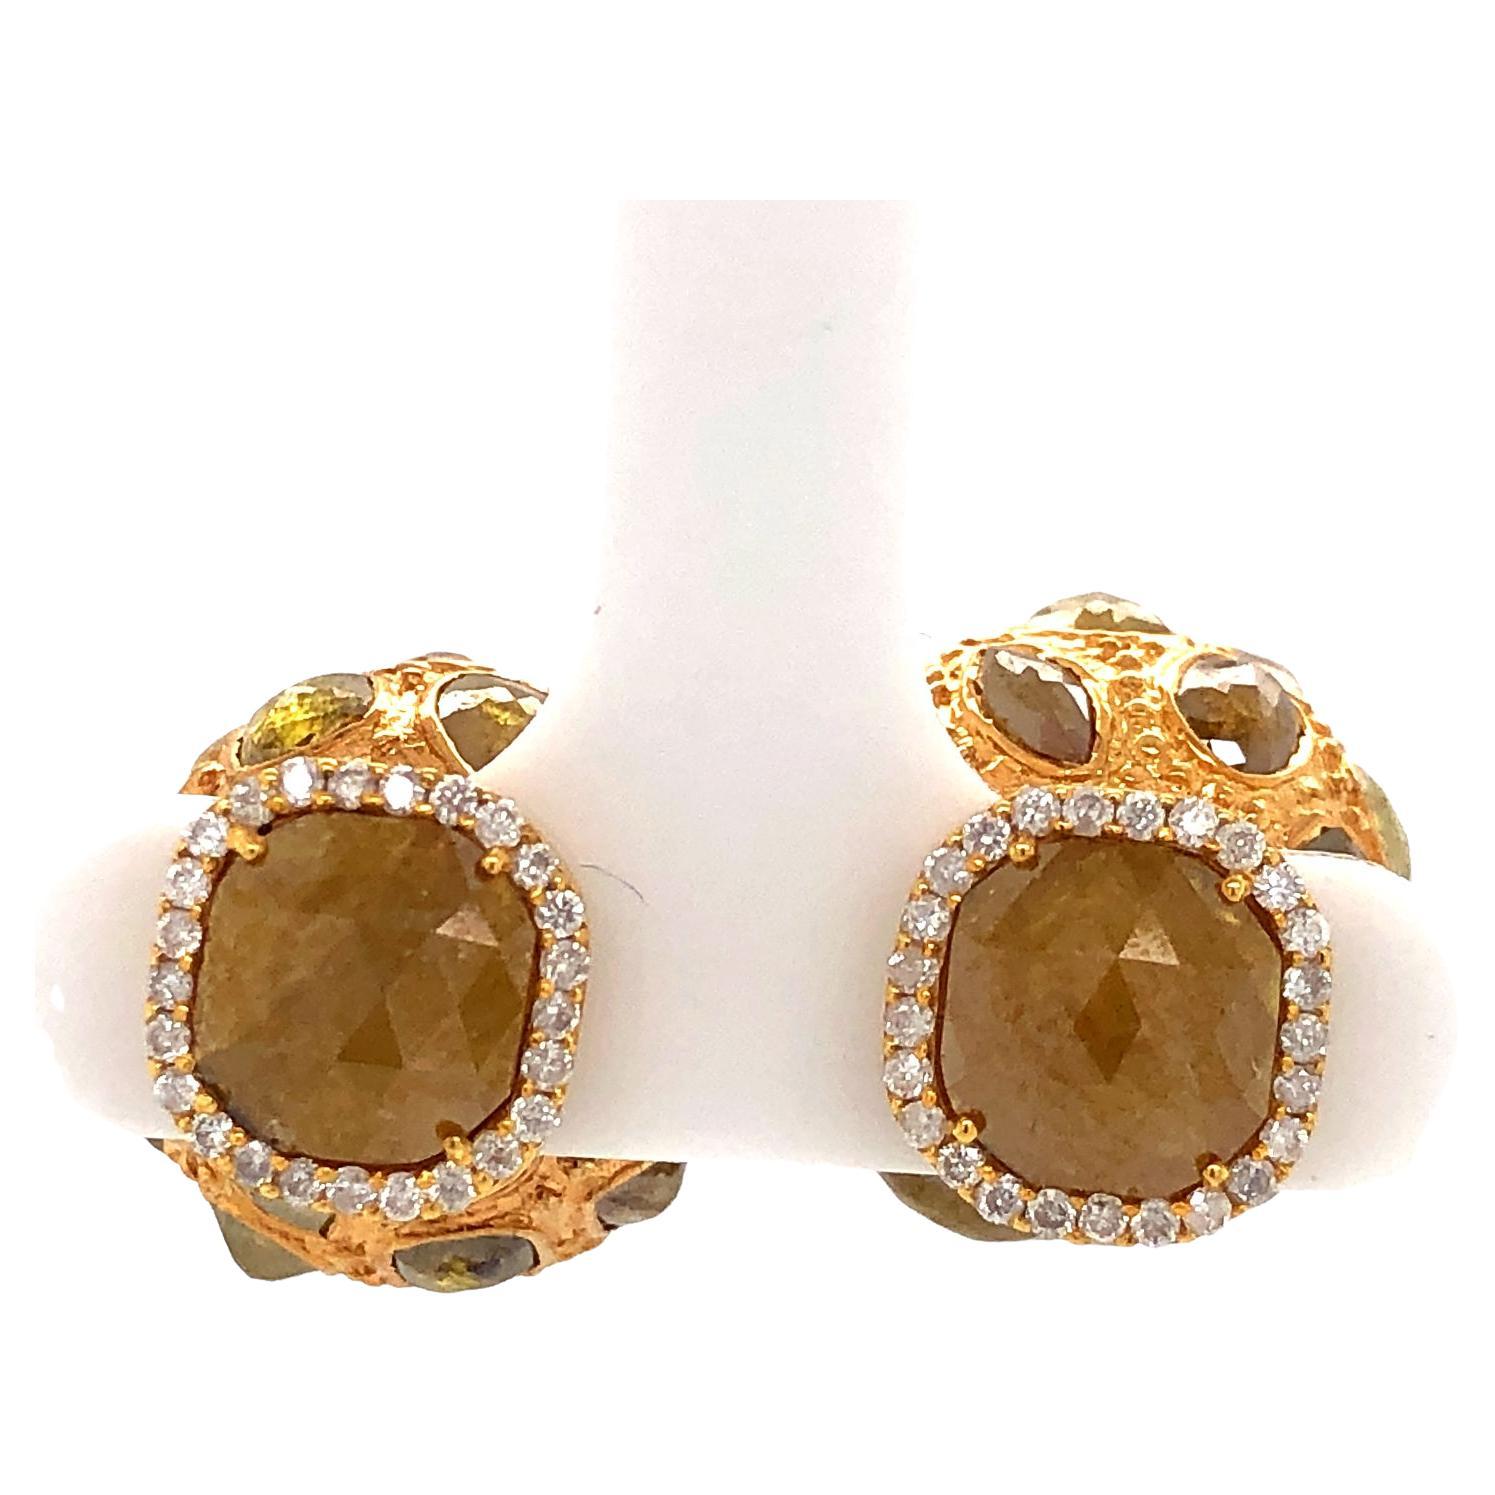 Ice Diamond Beads Earrings with Pave Diamonds Made in 18k Gold For Sale